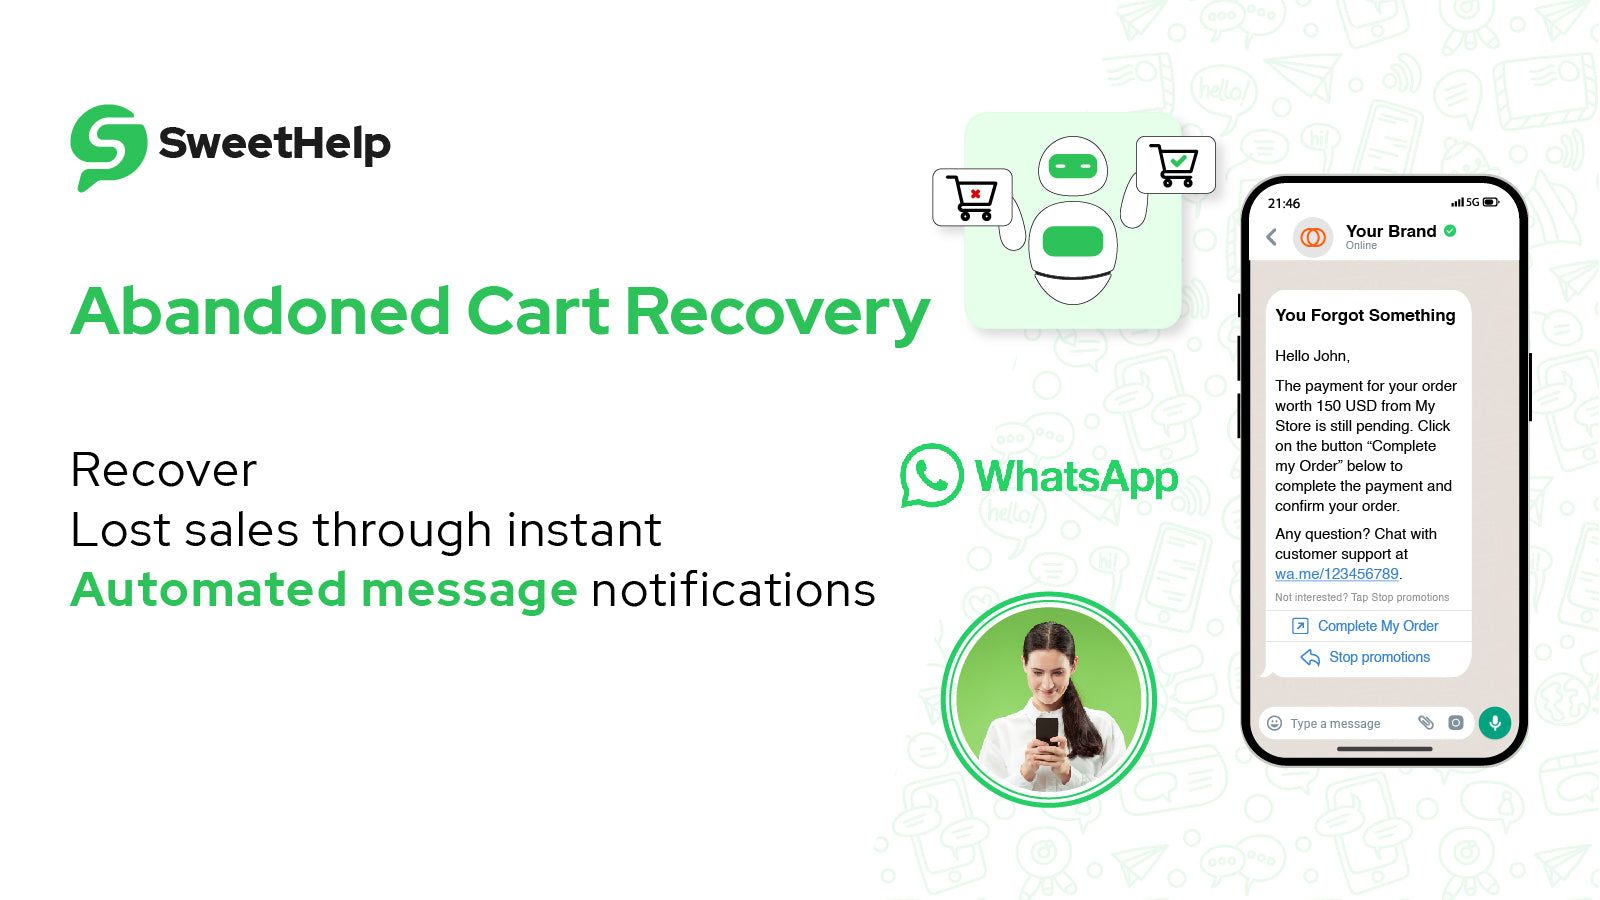 WhatsApp & SMS Replacement for SMSBump, Superlemon, Pushdaddy